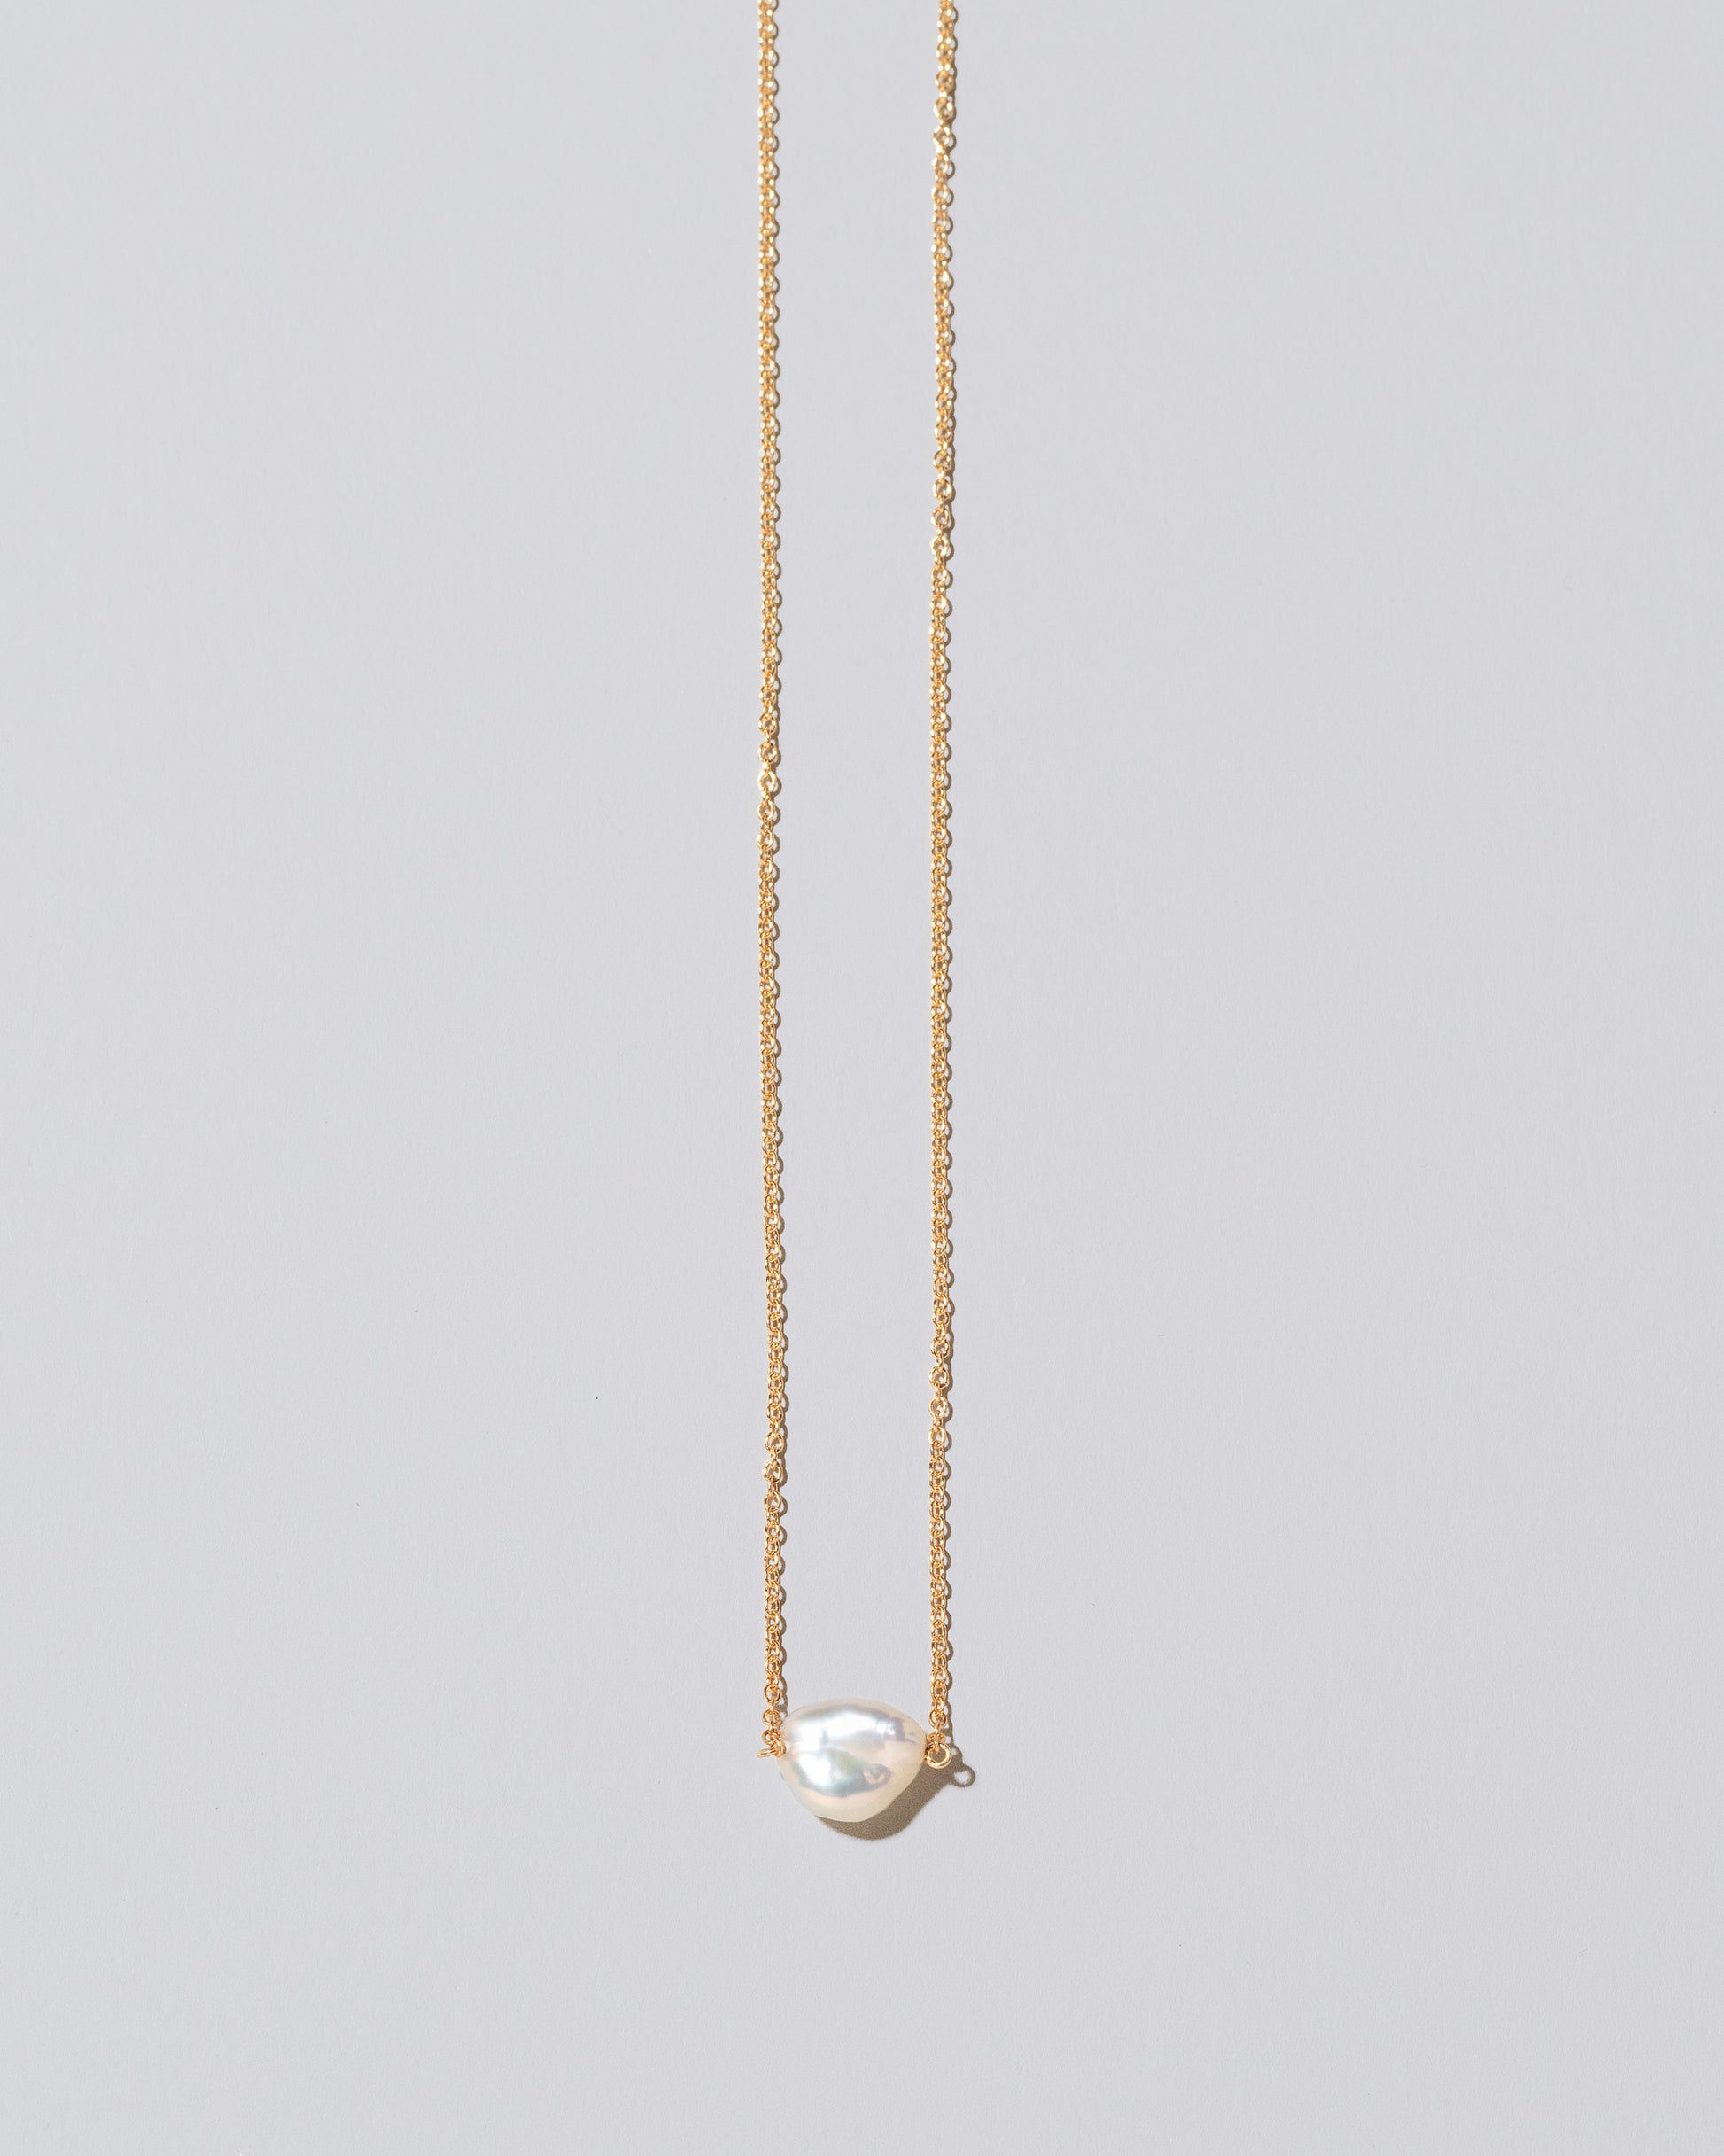 Lagniappe Pearl Necklace White #1 on light color background.